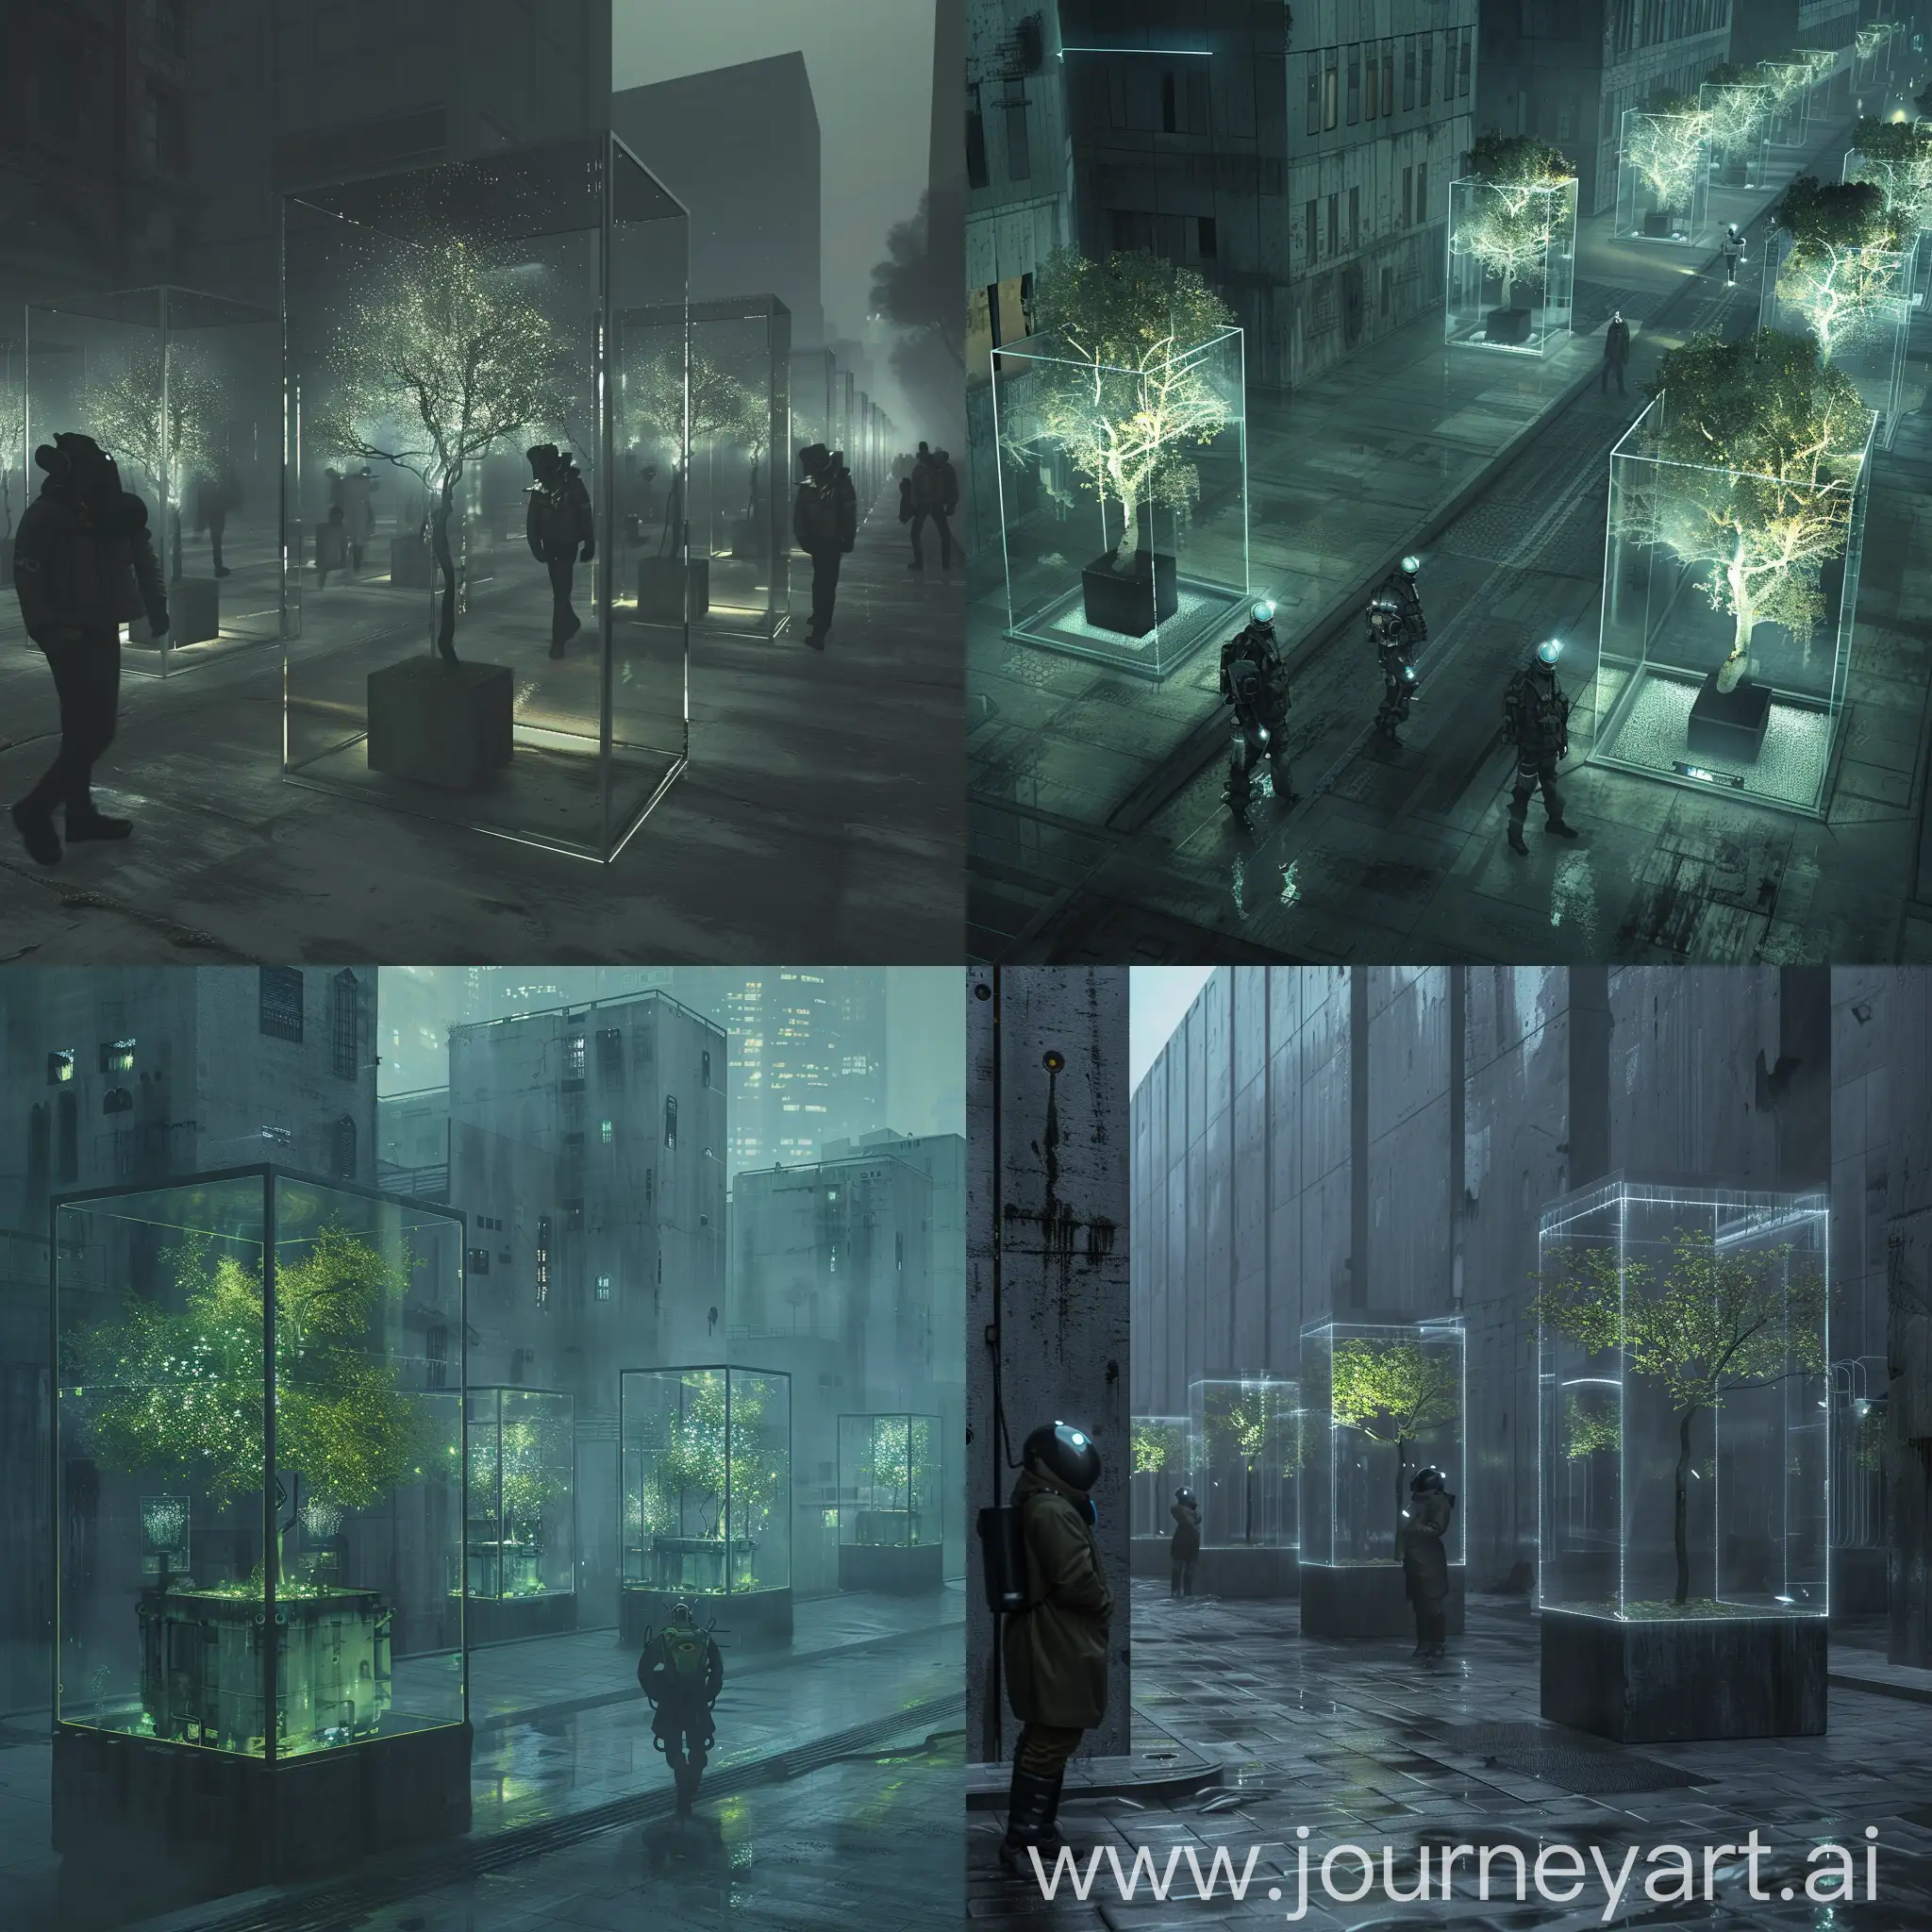 Night life in a dystopian city of concrete, where each street is illuminated by bioluminescent trees enclosed in glass cuboids. The inhabitants, in technologically advanced oxygen masks, contrast with the gray surroundings, seeking a bit of nature amidst the urban void.